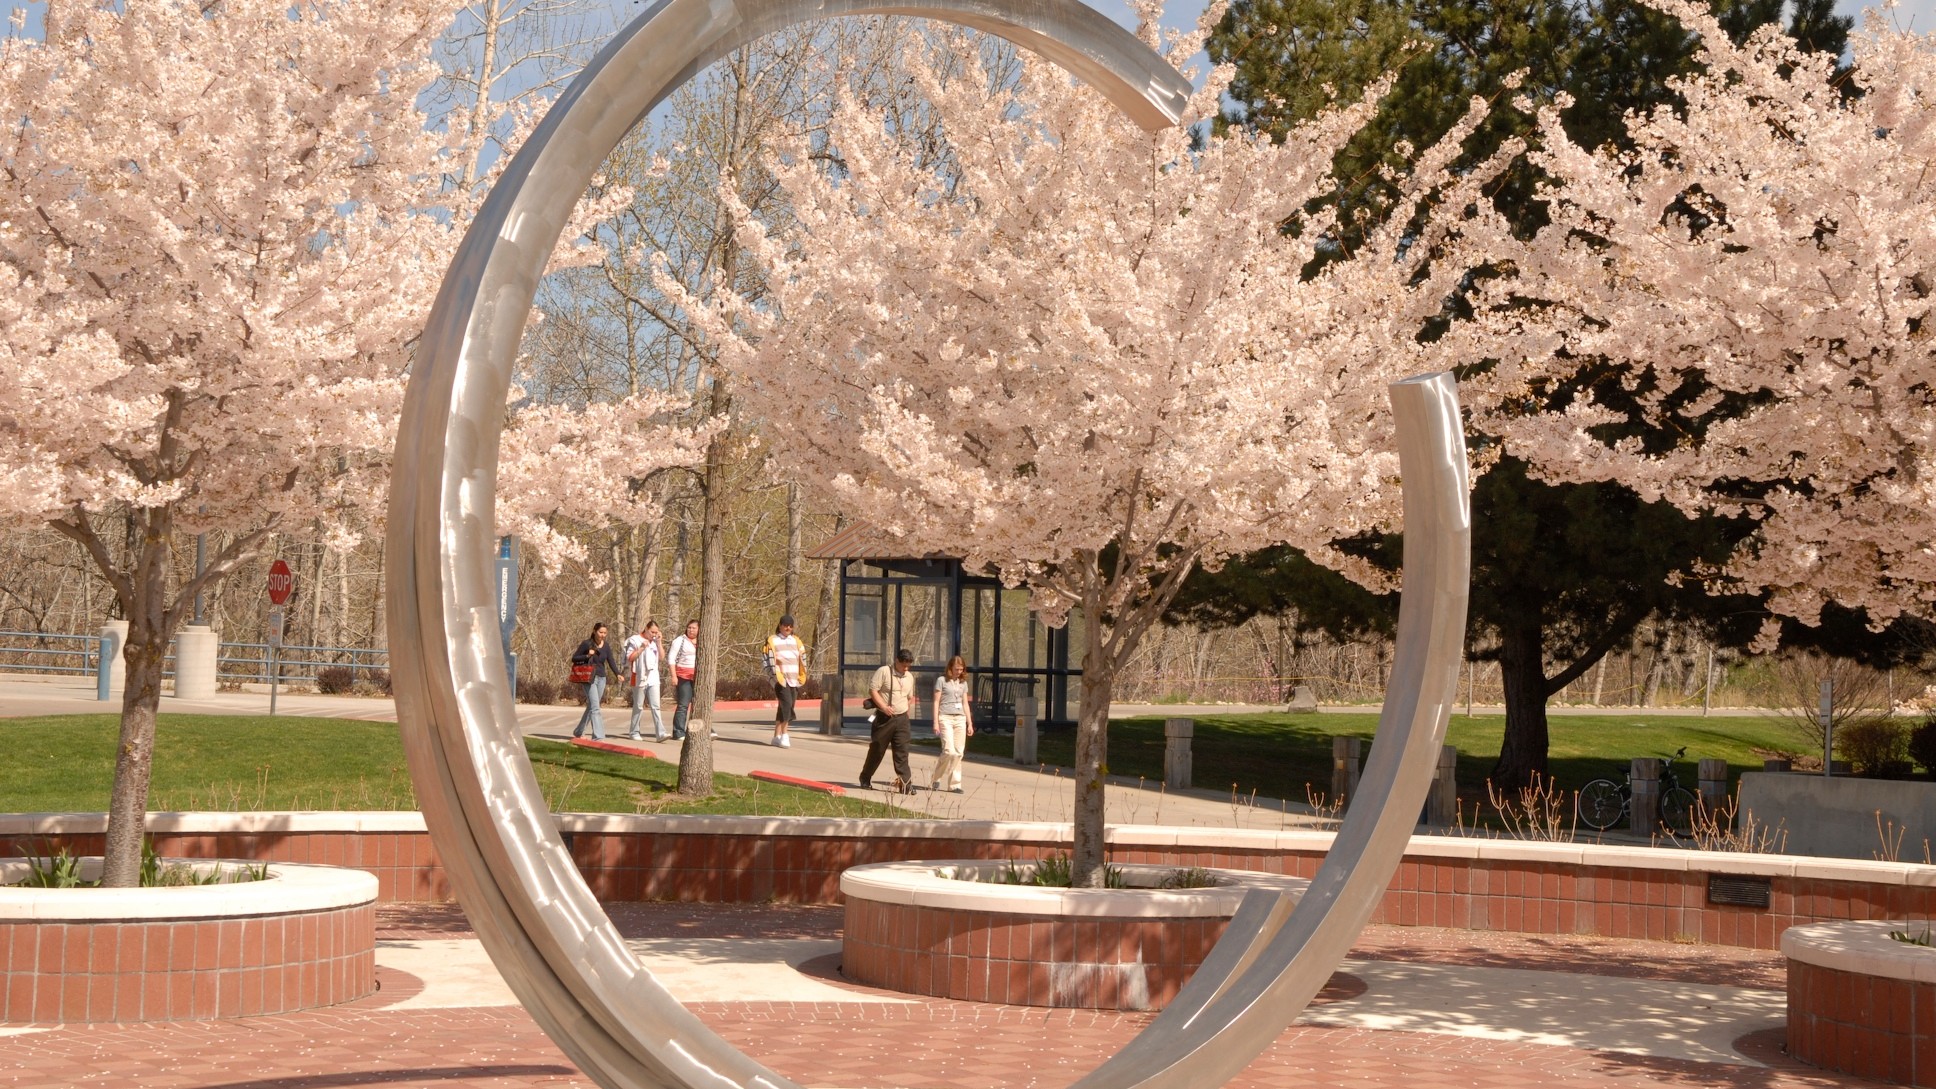 students seen through the circle sculpture surrounded by flowering trees